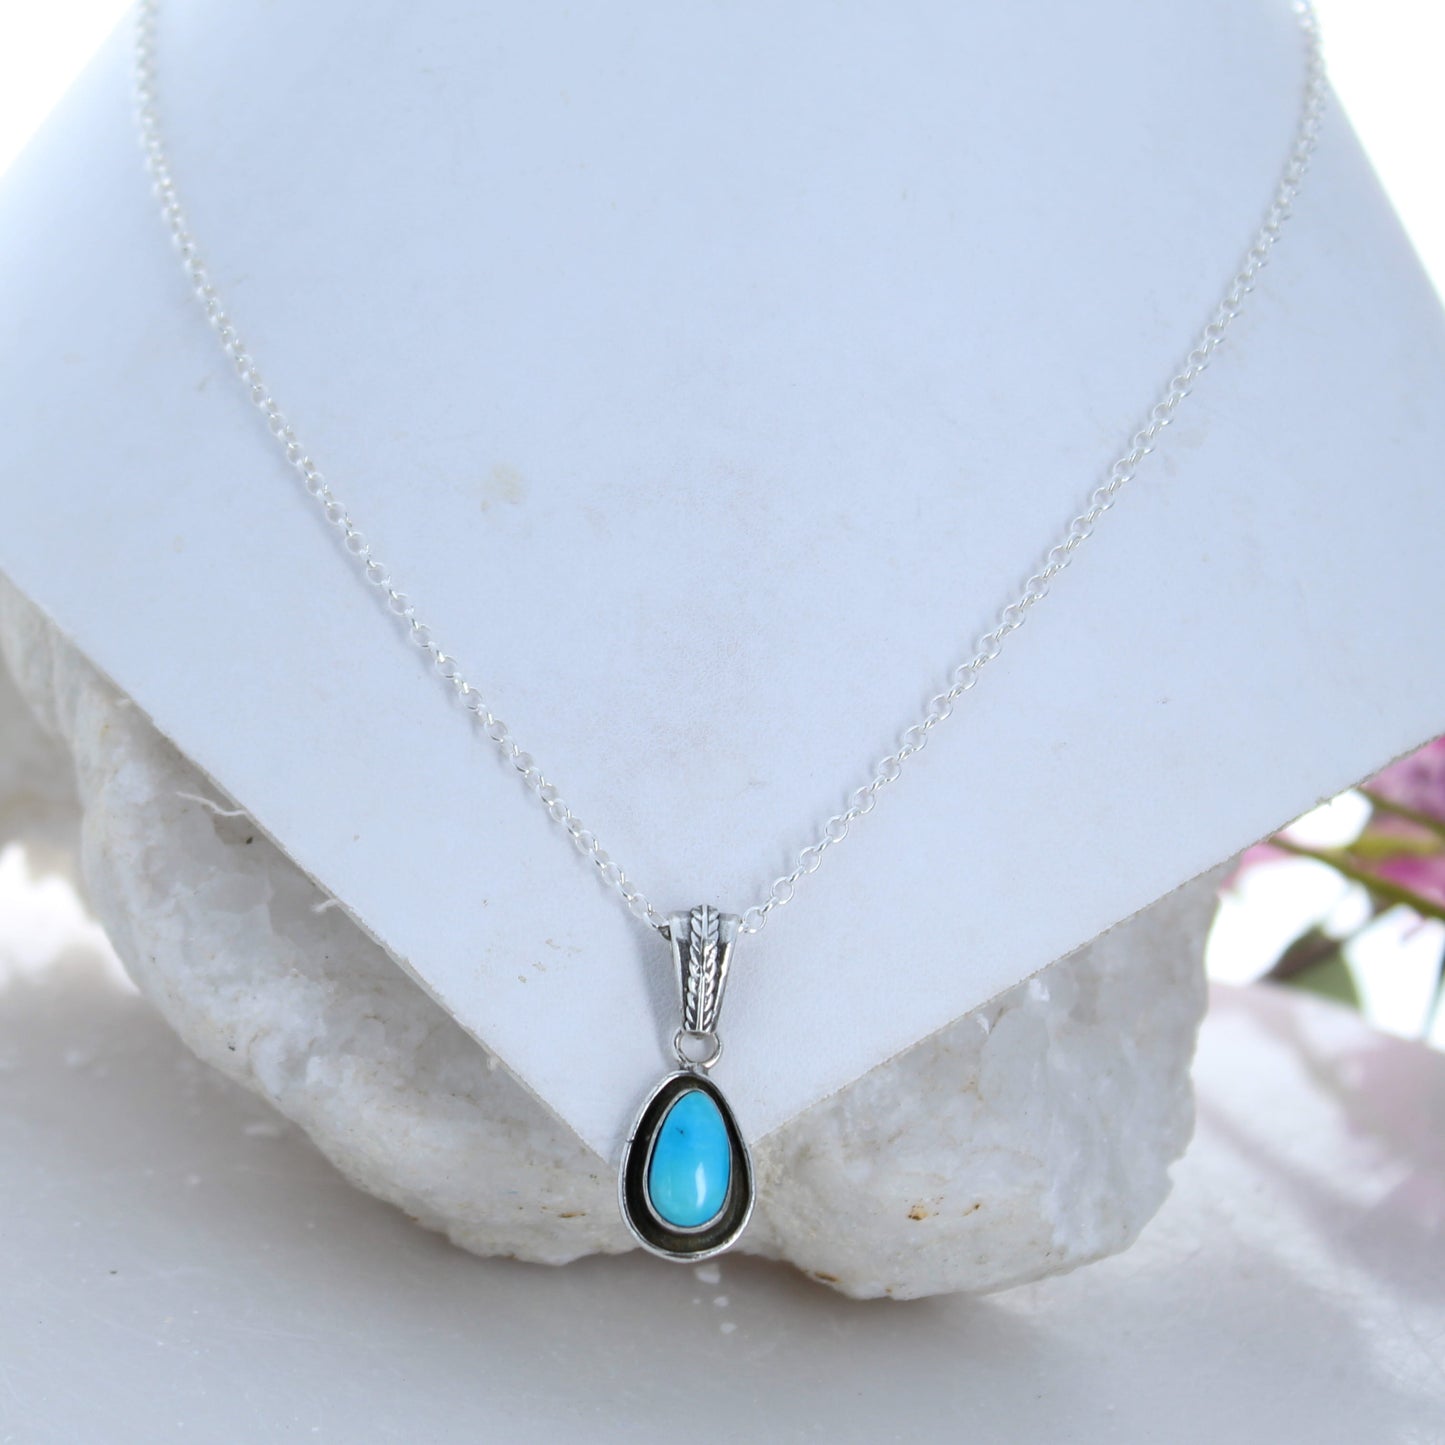 Blue Sonoran Rose Turquoise Centerpiece Pendant Sterling Silver #2